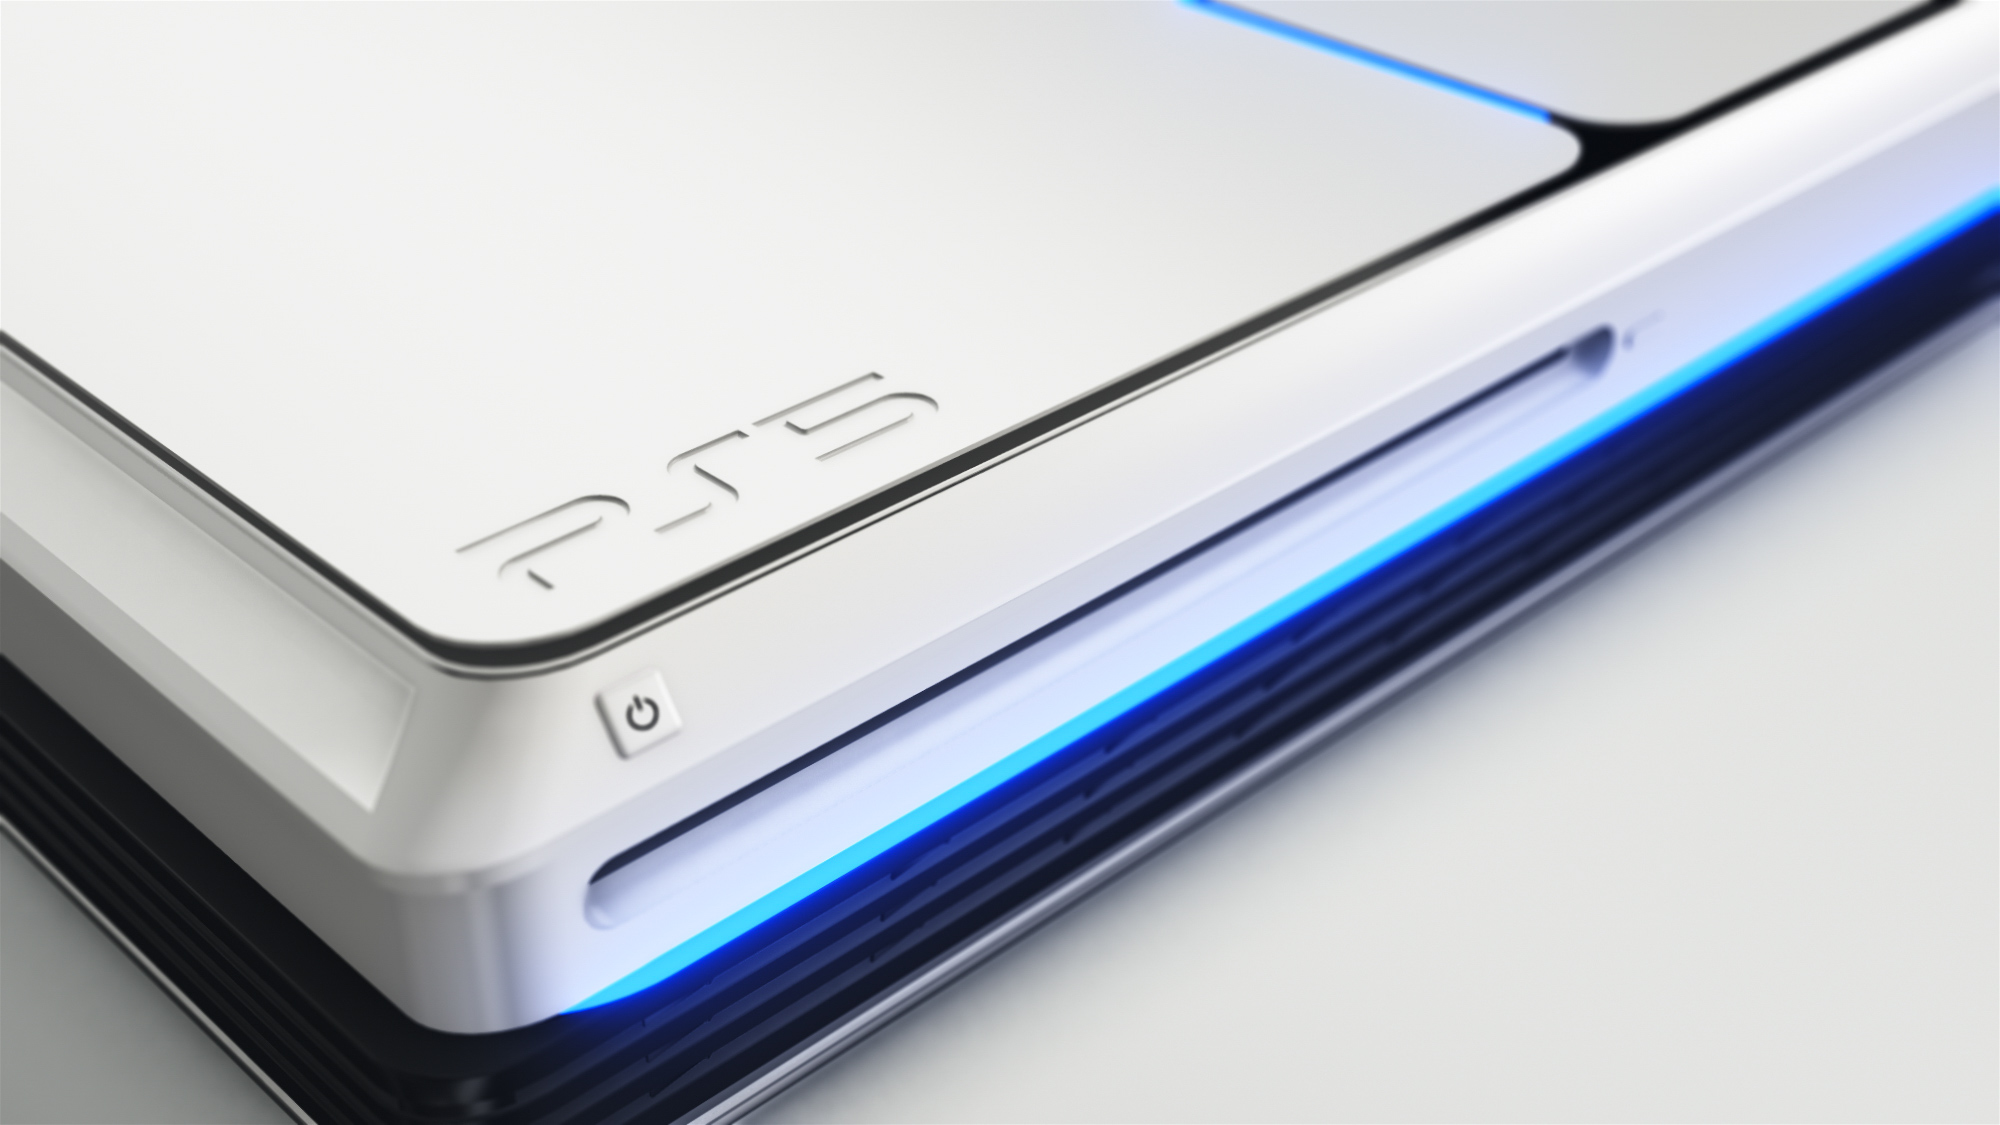 news about the ps5